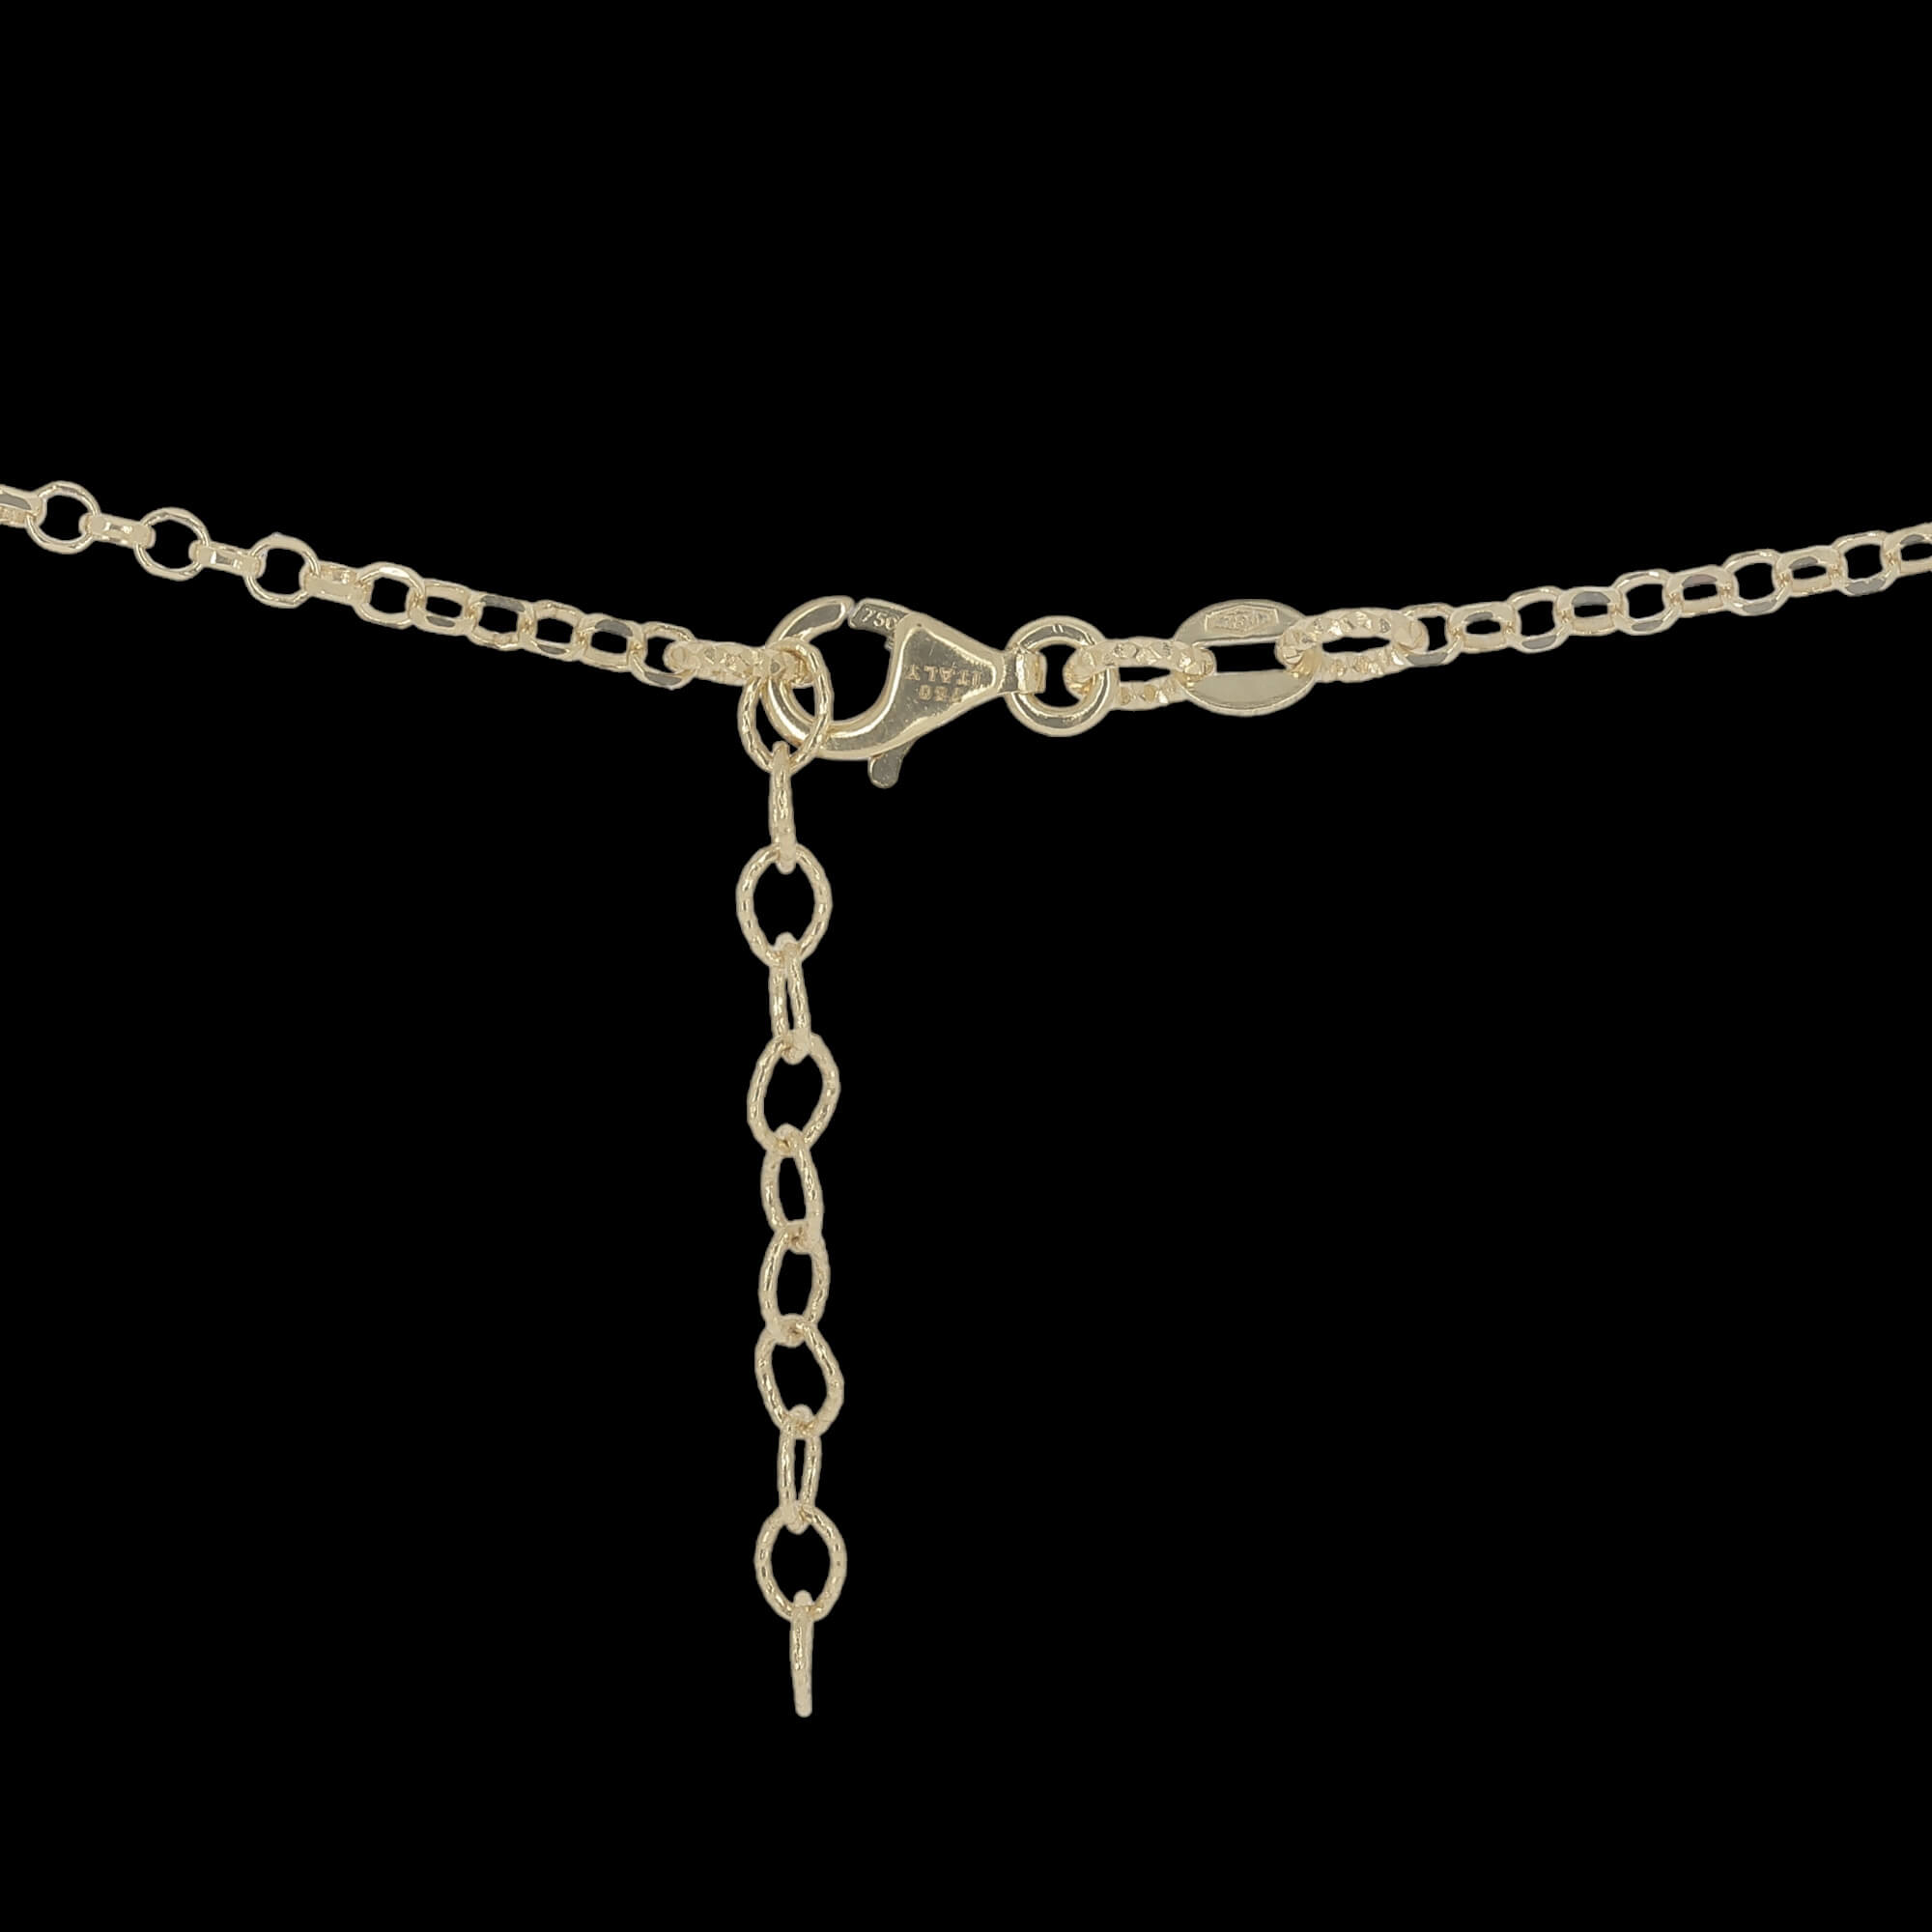 Chic round necklace with refined branches of 18kt gold